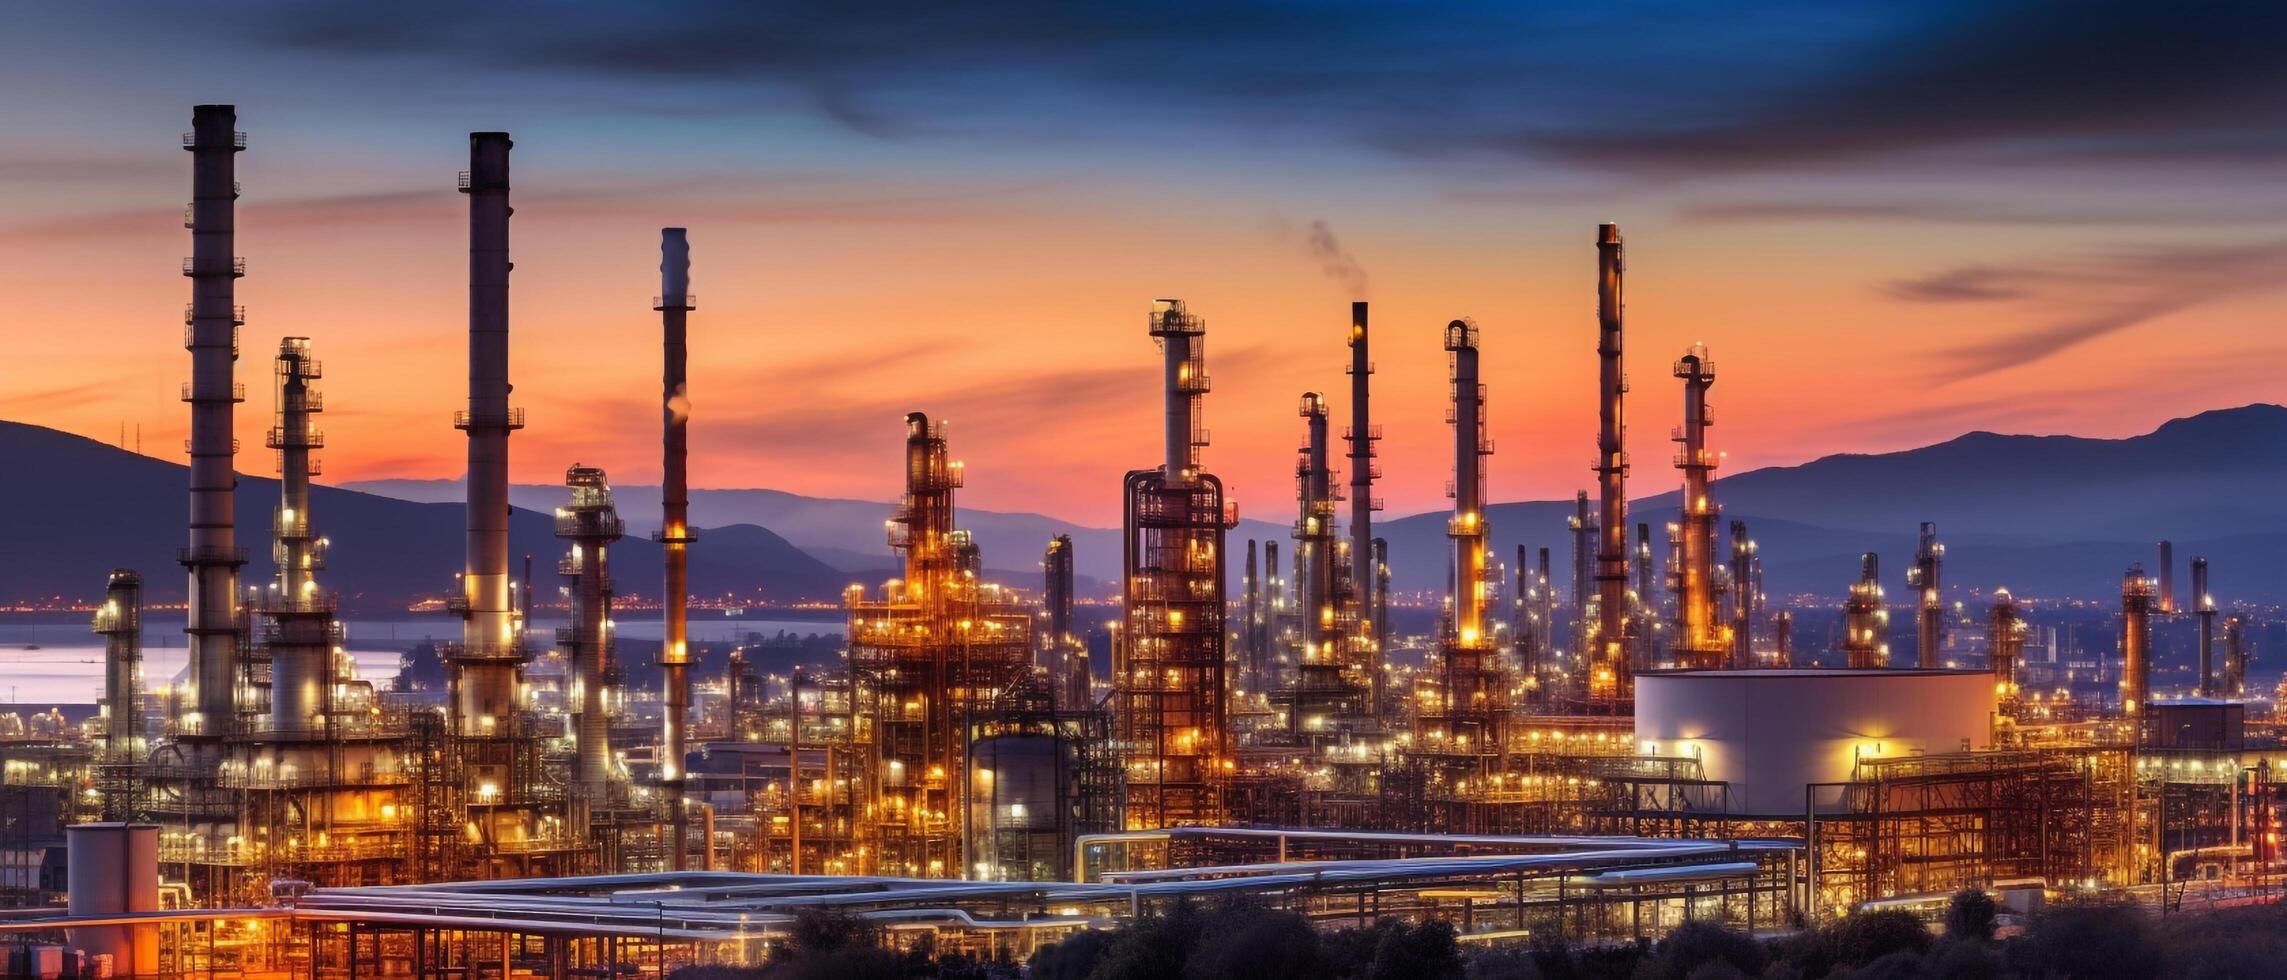 oil refinery field at night, the petrochemical industry, photo